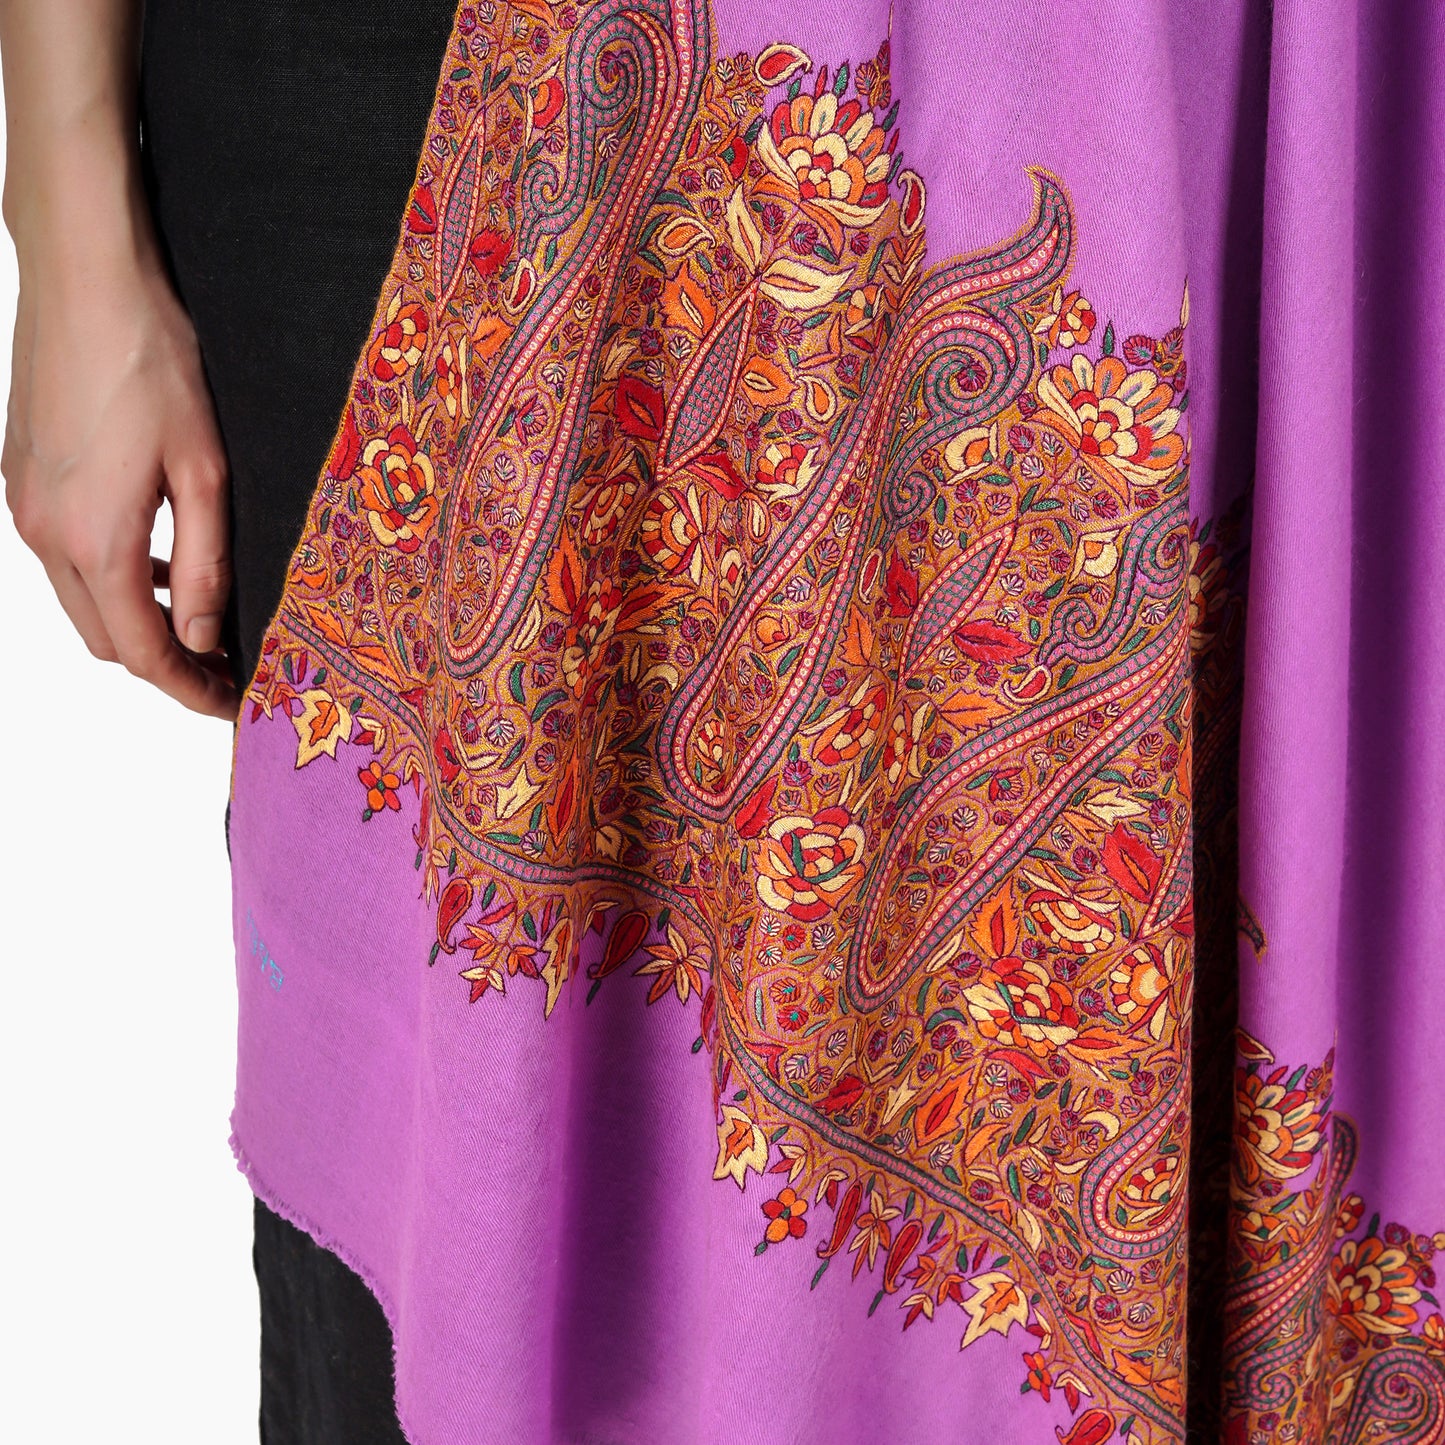 Cashmere Pashmina Shawl Embroidered (Orchid)